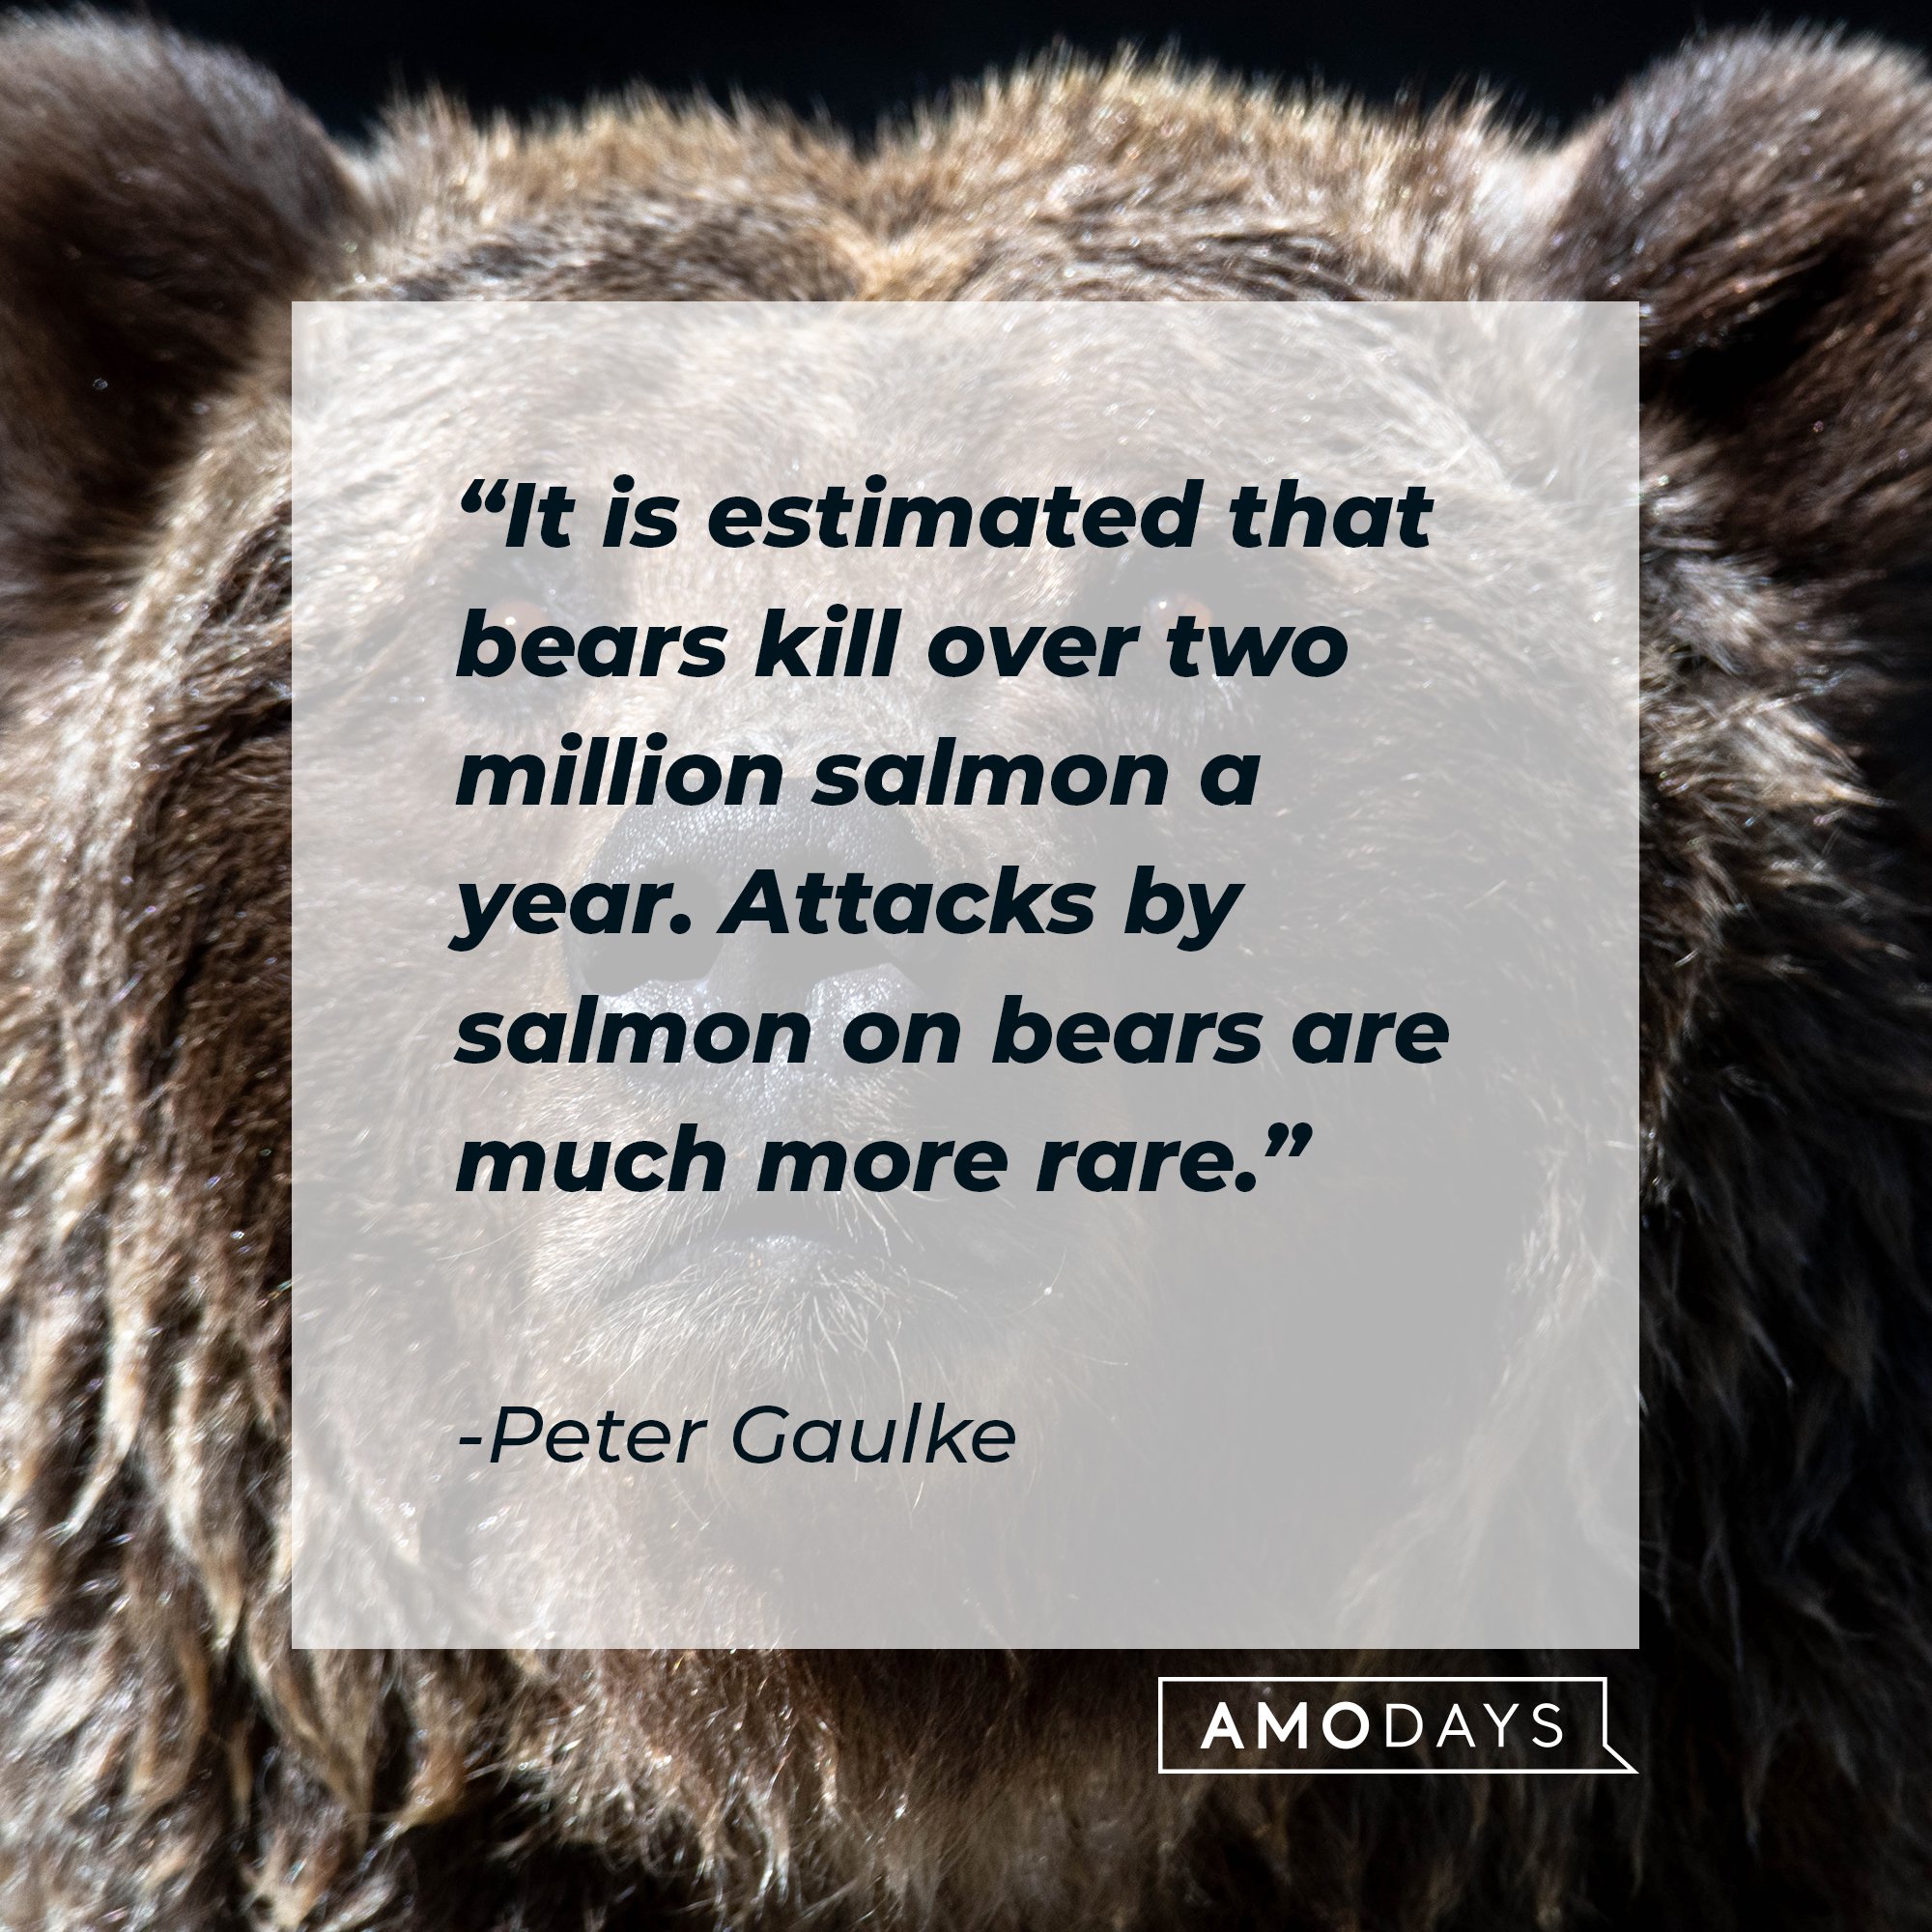 Peter Gaulke’s quote: "It is estimated that bears kill over two million salmon a year. Attacks by salmon on bears are much more rare." | Image: AmoDays